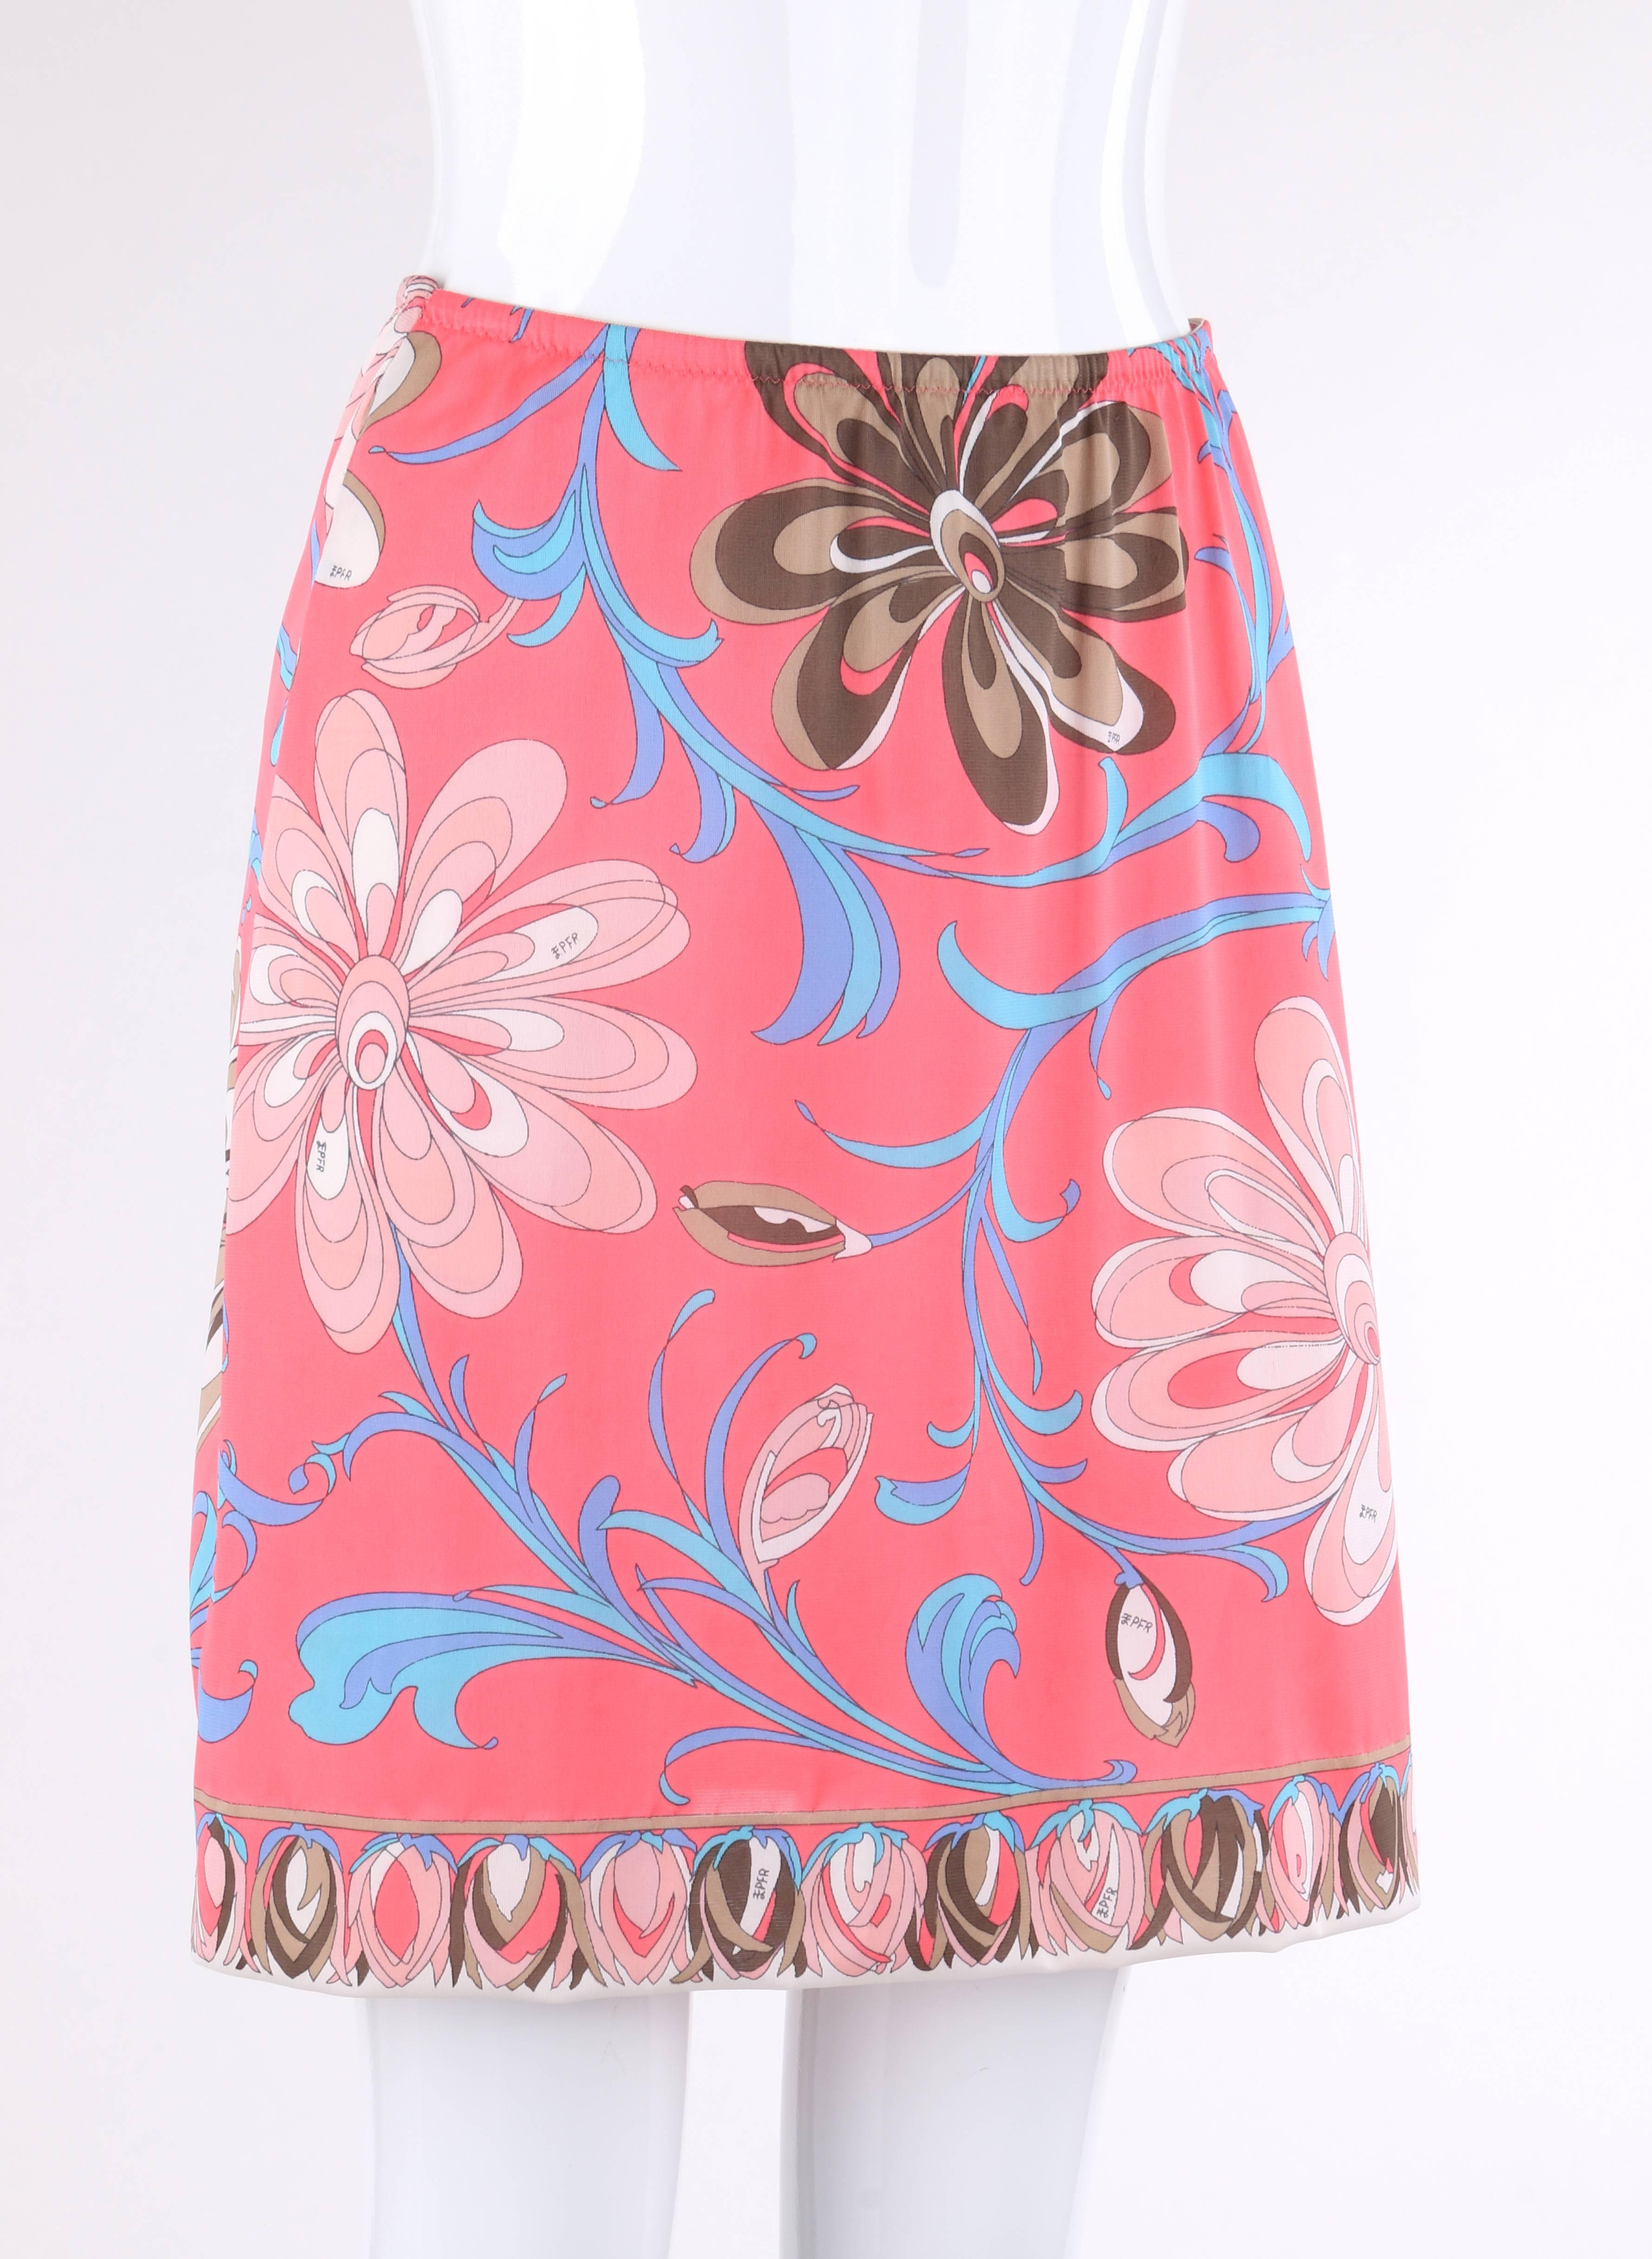 Vintage c.1960's Emilio Pucci for Formfit Rogers pink multicolor floral print slip/skirt. Decorative flower bud border detail on hem and back. Elastic waistband. Skirt has been taken in slightly at each side and re-hemmed. Marked Fabric Content: